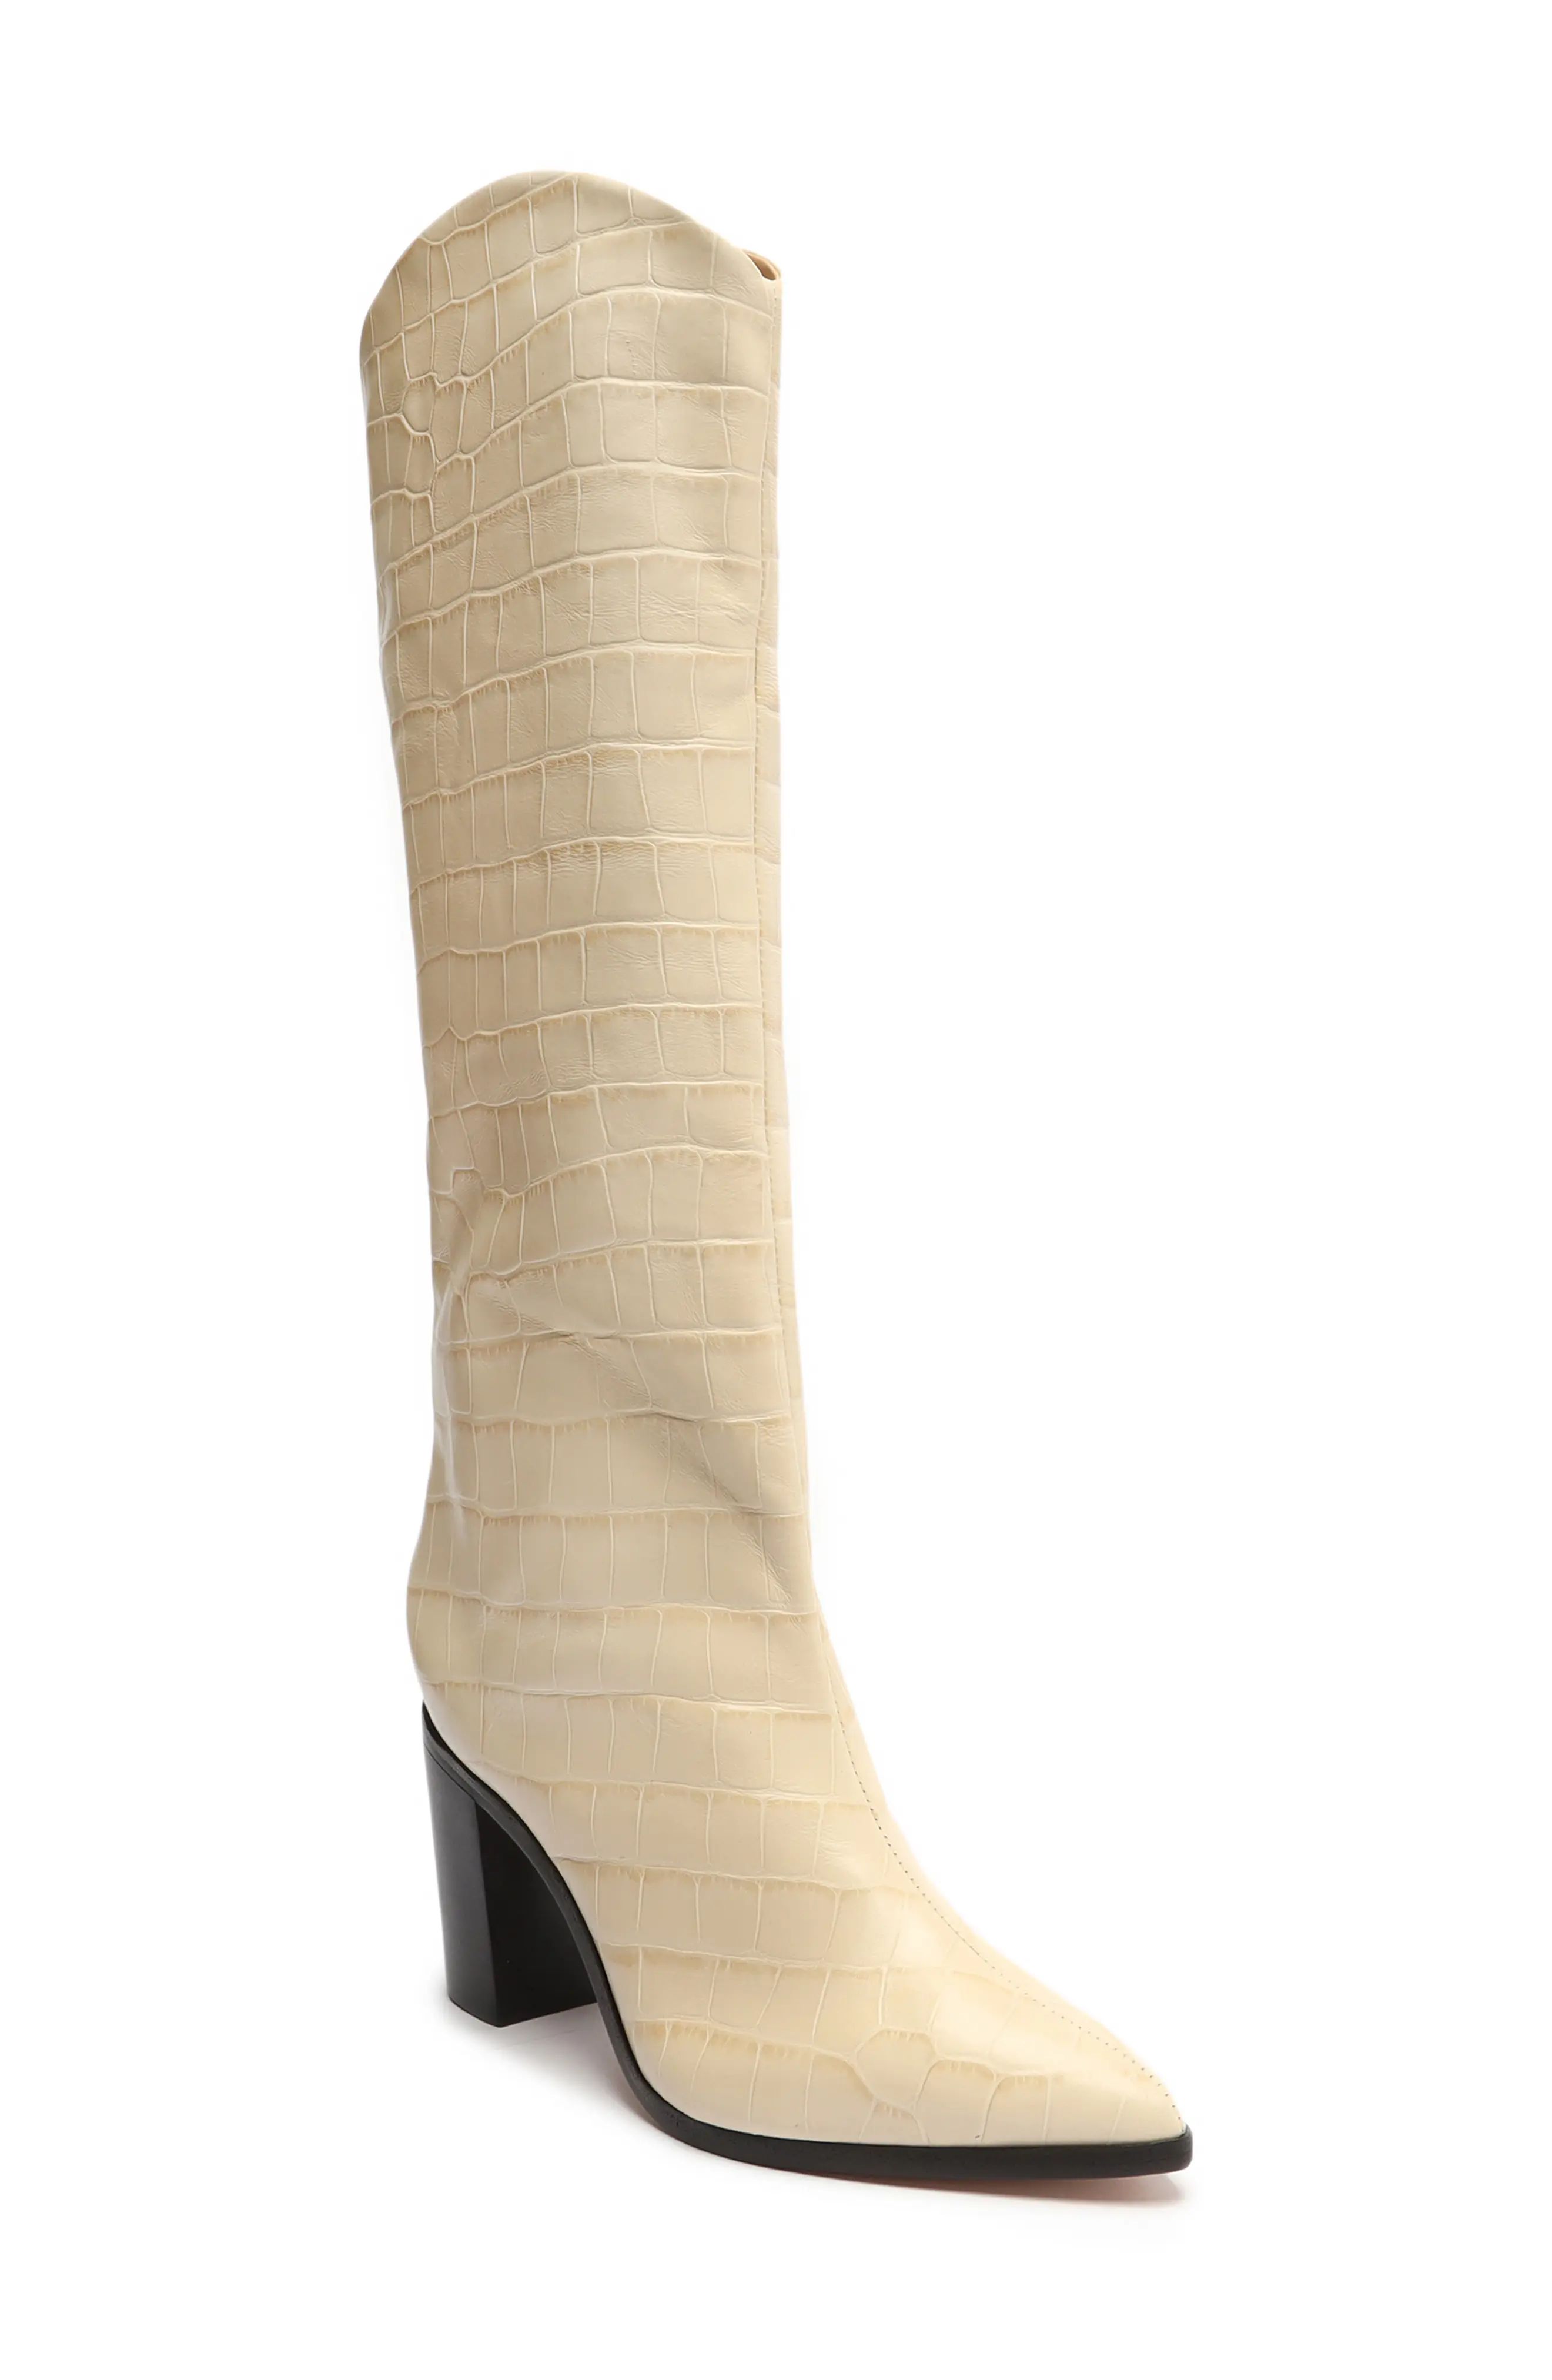 Schutz Analeah Knee High Western Boot, Size 9.5 in Egg Shell at Nordstrom | Nordstrom